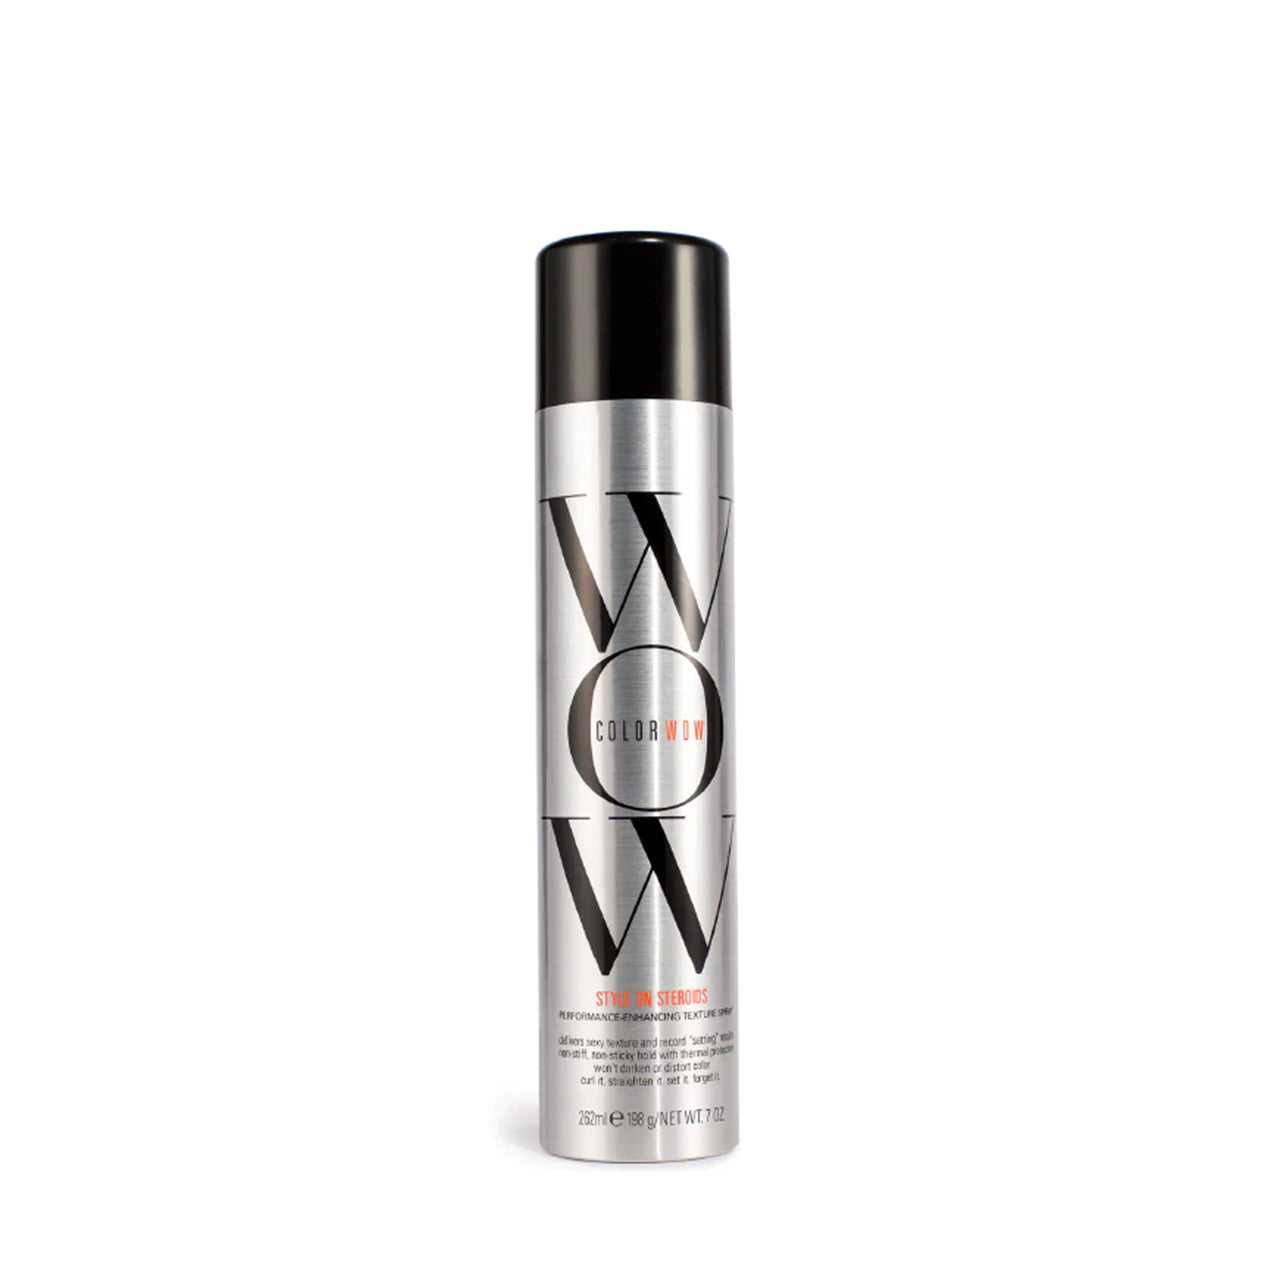 COLOR WOW STYLE ON STEROIDS TEXTURE FINISHING SPRAY 262ML